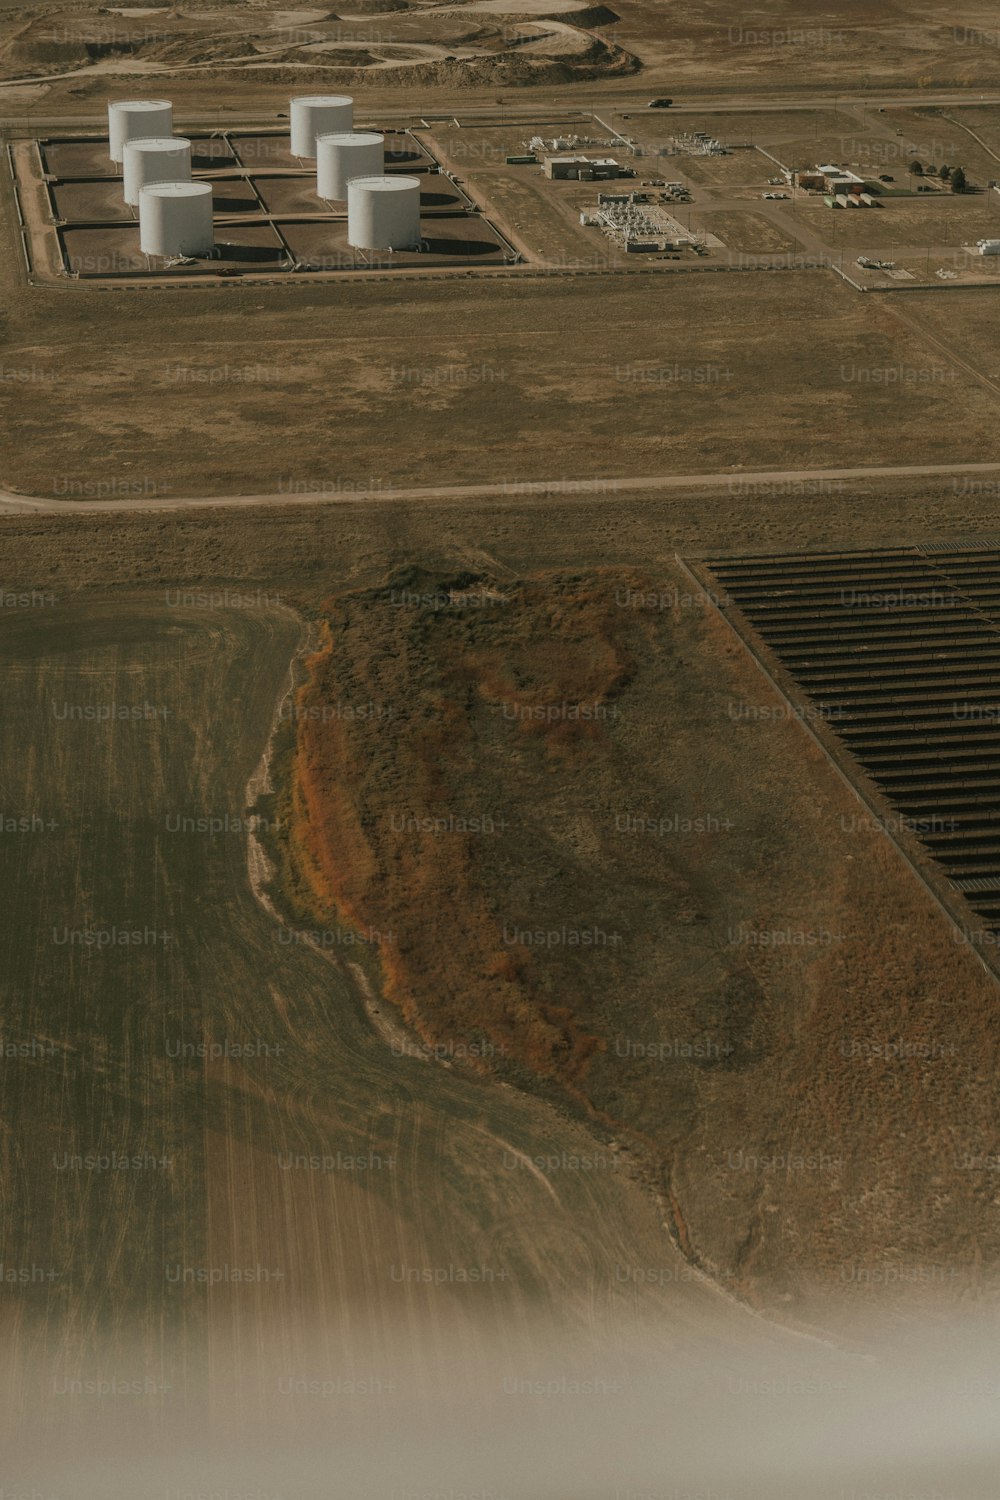 an aerial view of a large field and a power plant